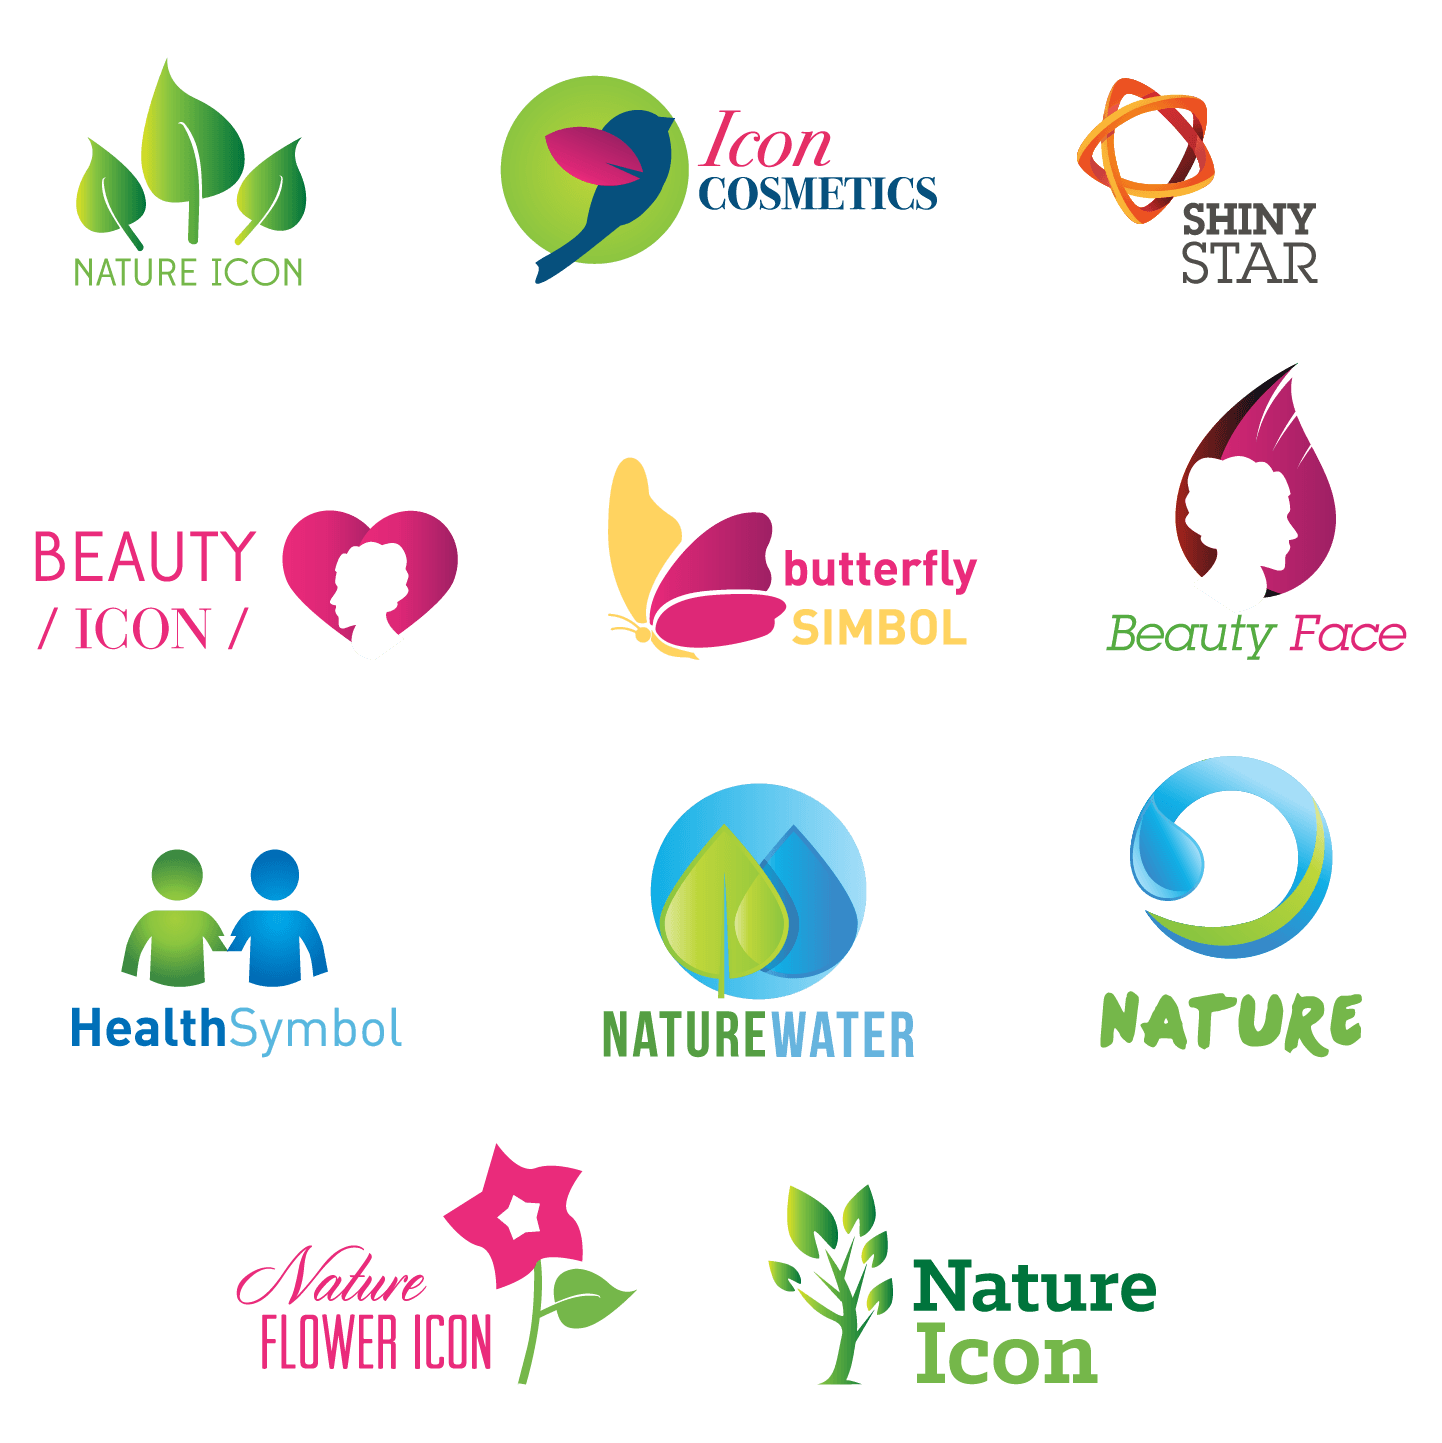 Cleanliness Logo - Environmental Care Logos Promoting Awareness | Zillion Designs